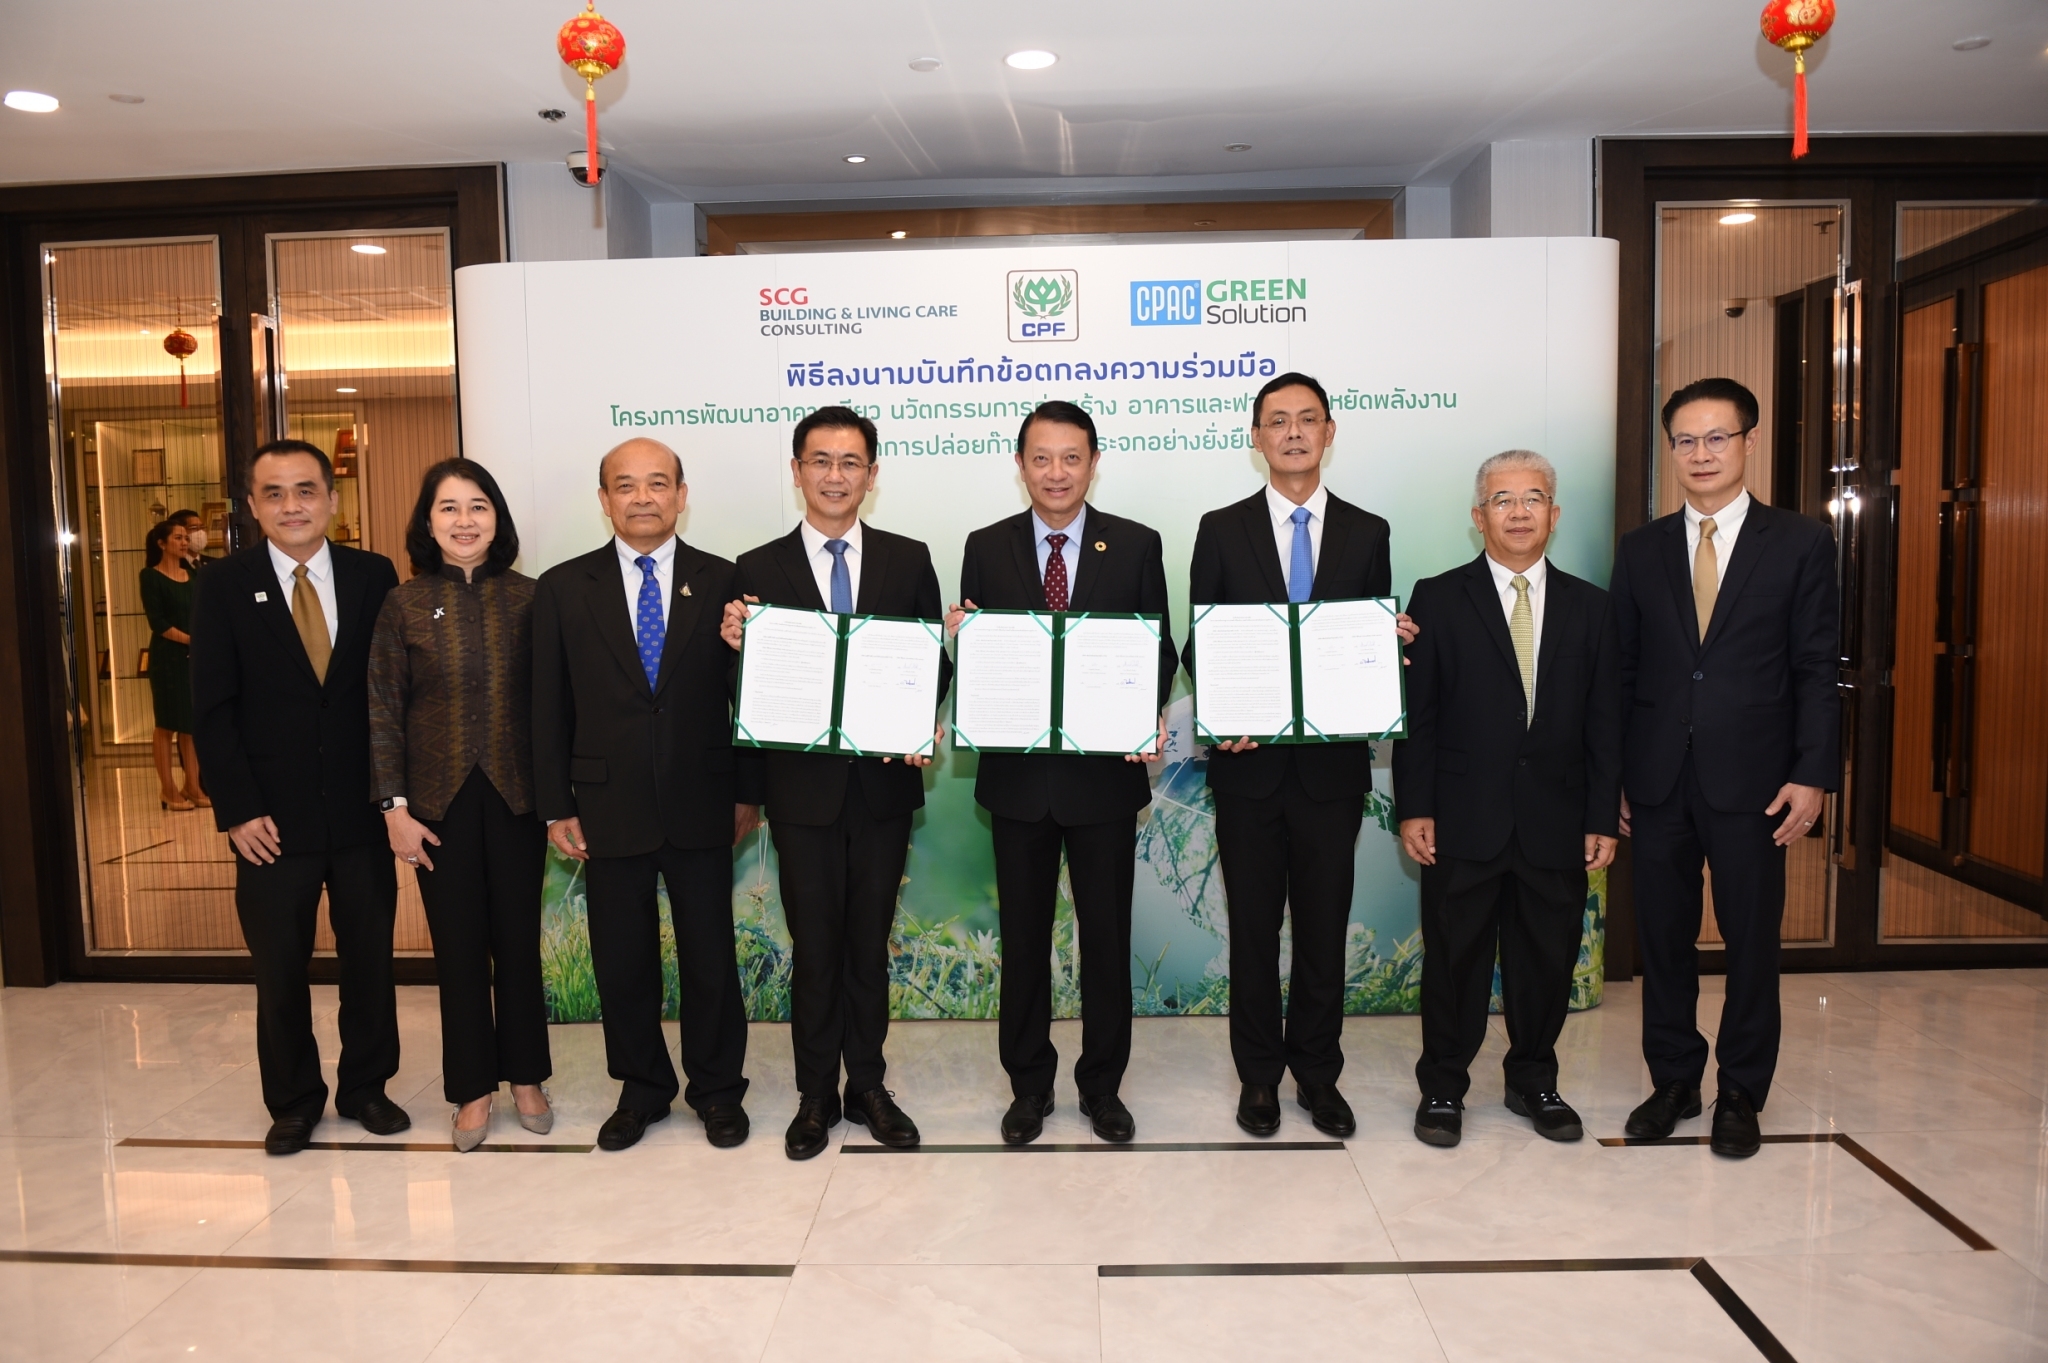 CP Foods and SCG team up to develop green building certification to reduce carbon emissions